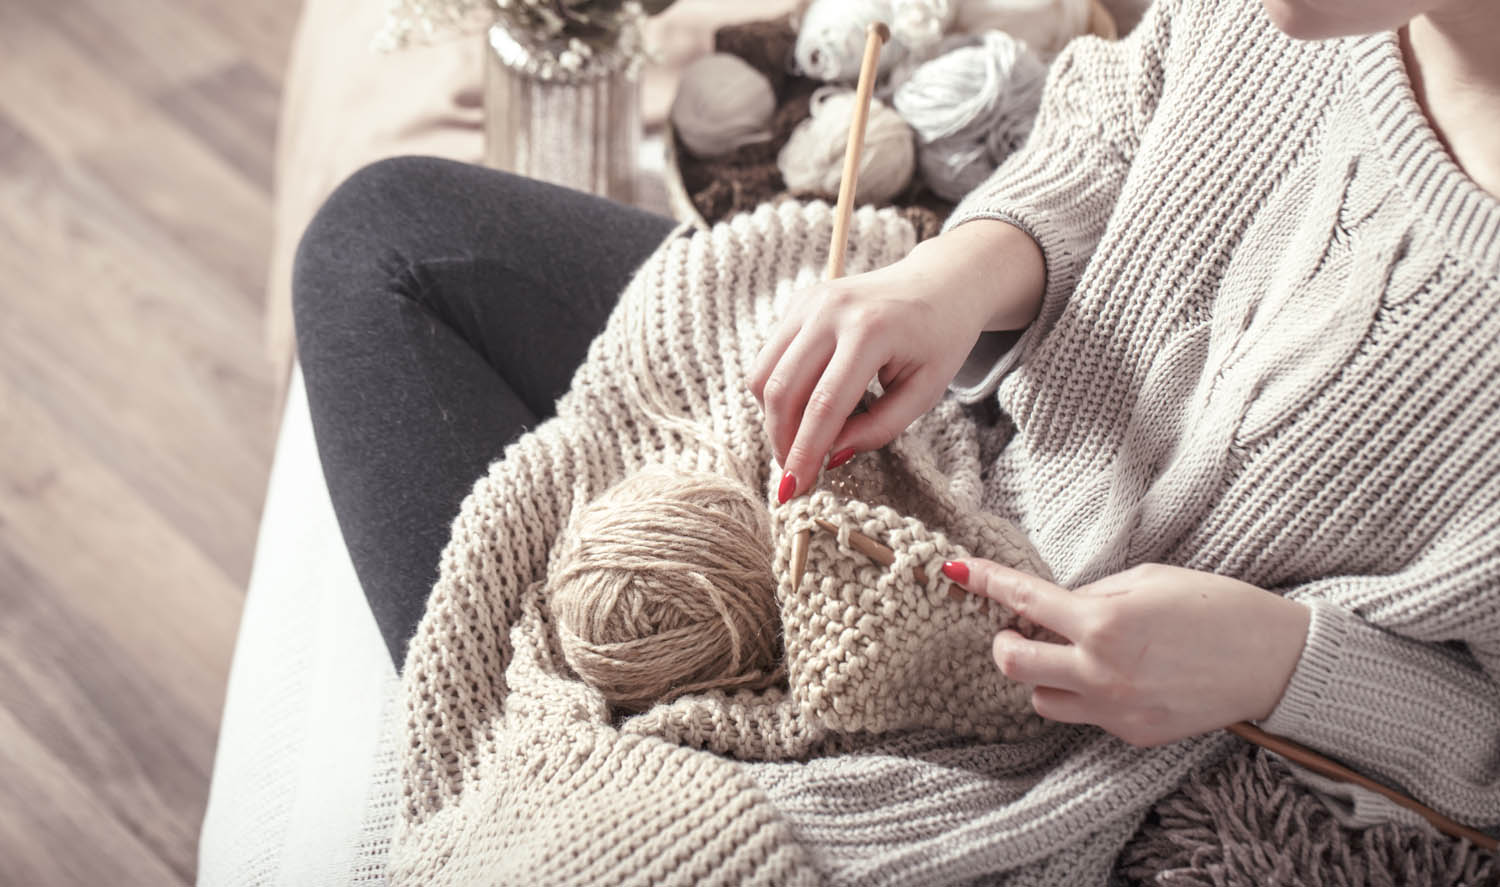 Vintage wooden spokes and yarn in the hands of a woman on a cozy sofa . Still life photo. The concept of comfort